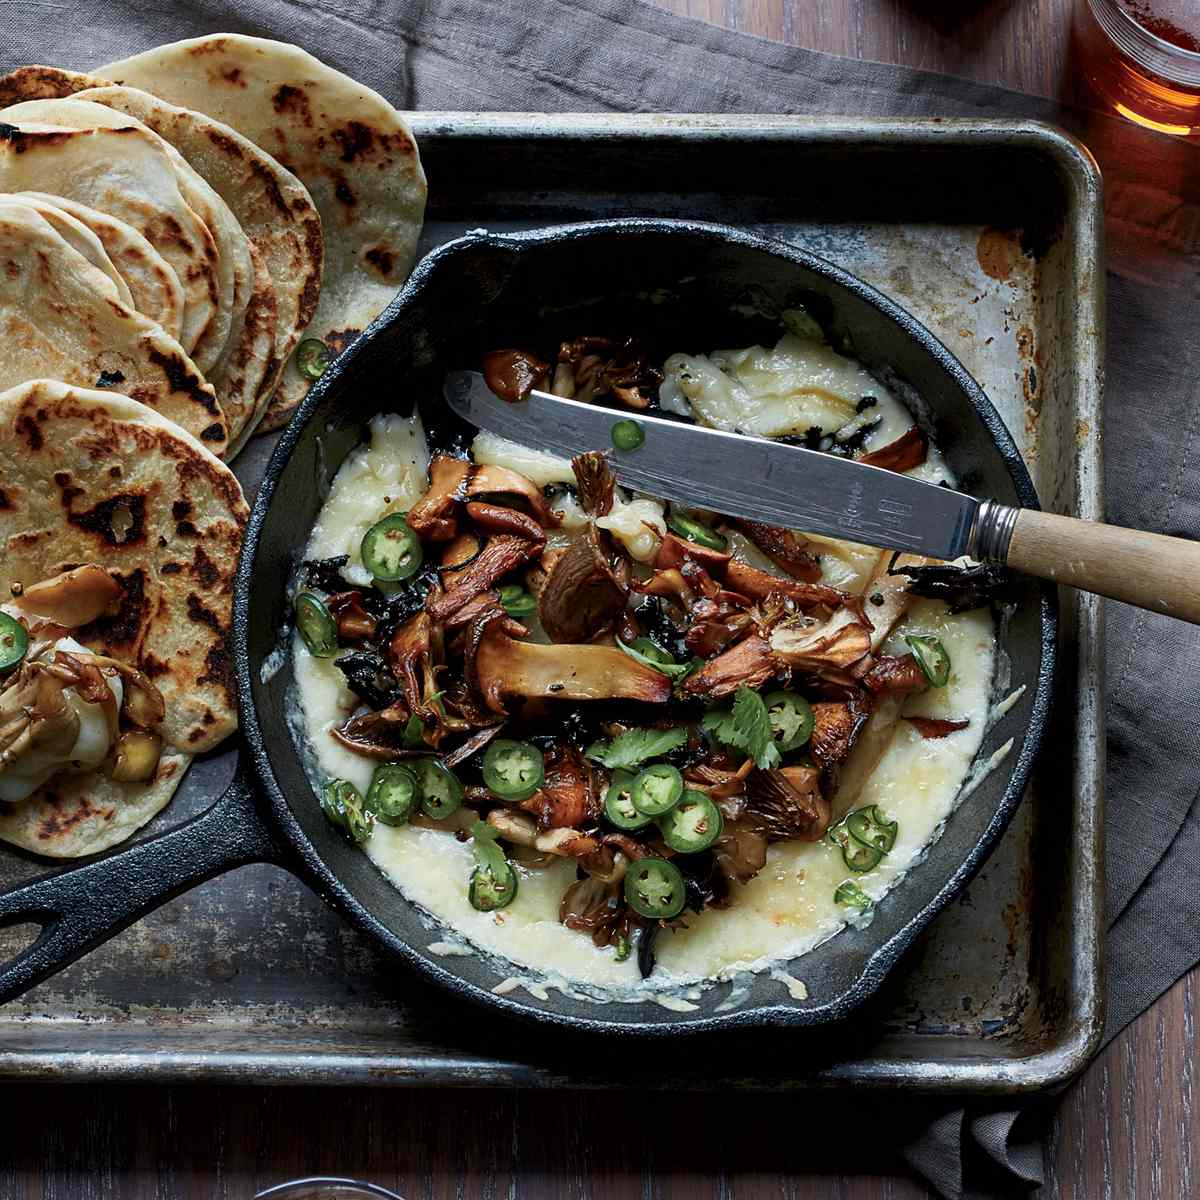 Bacony Tortillas with Melted Cheese and Crispy Mushrooms